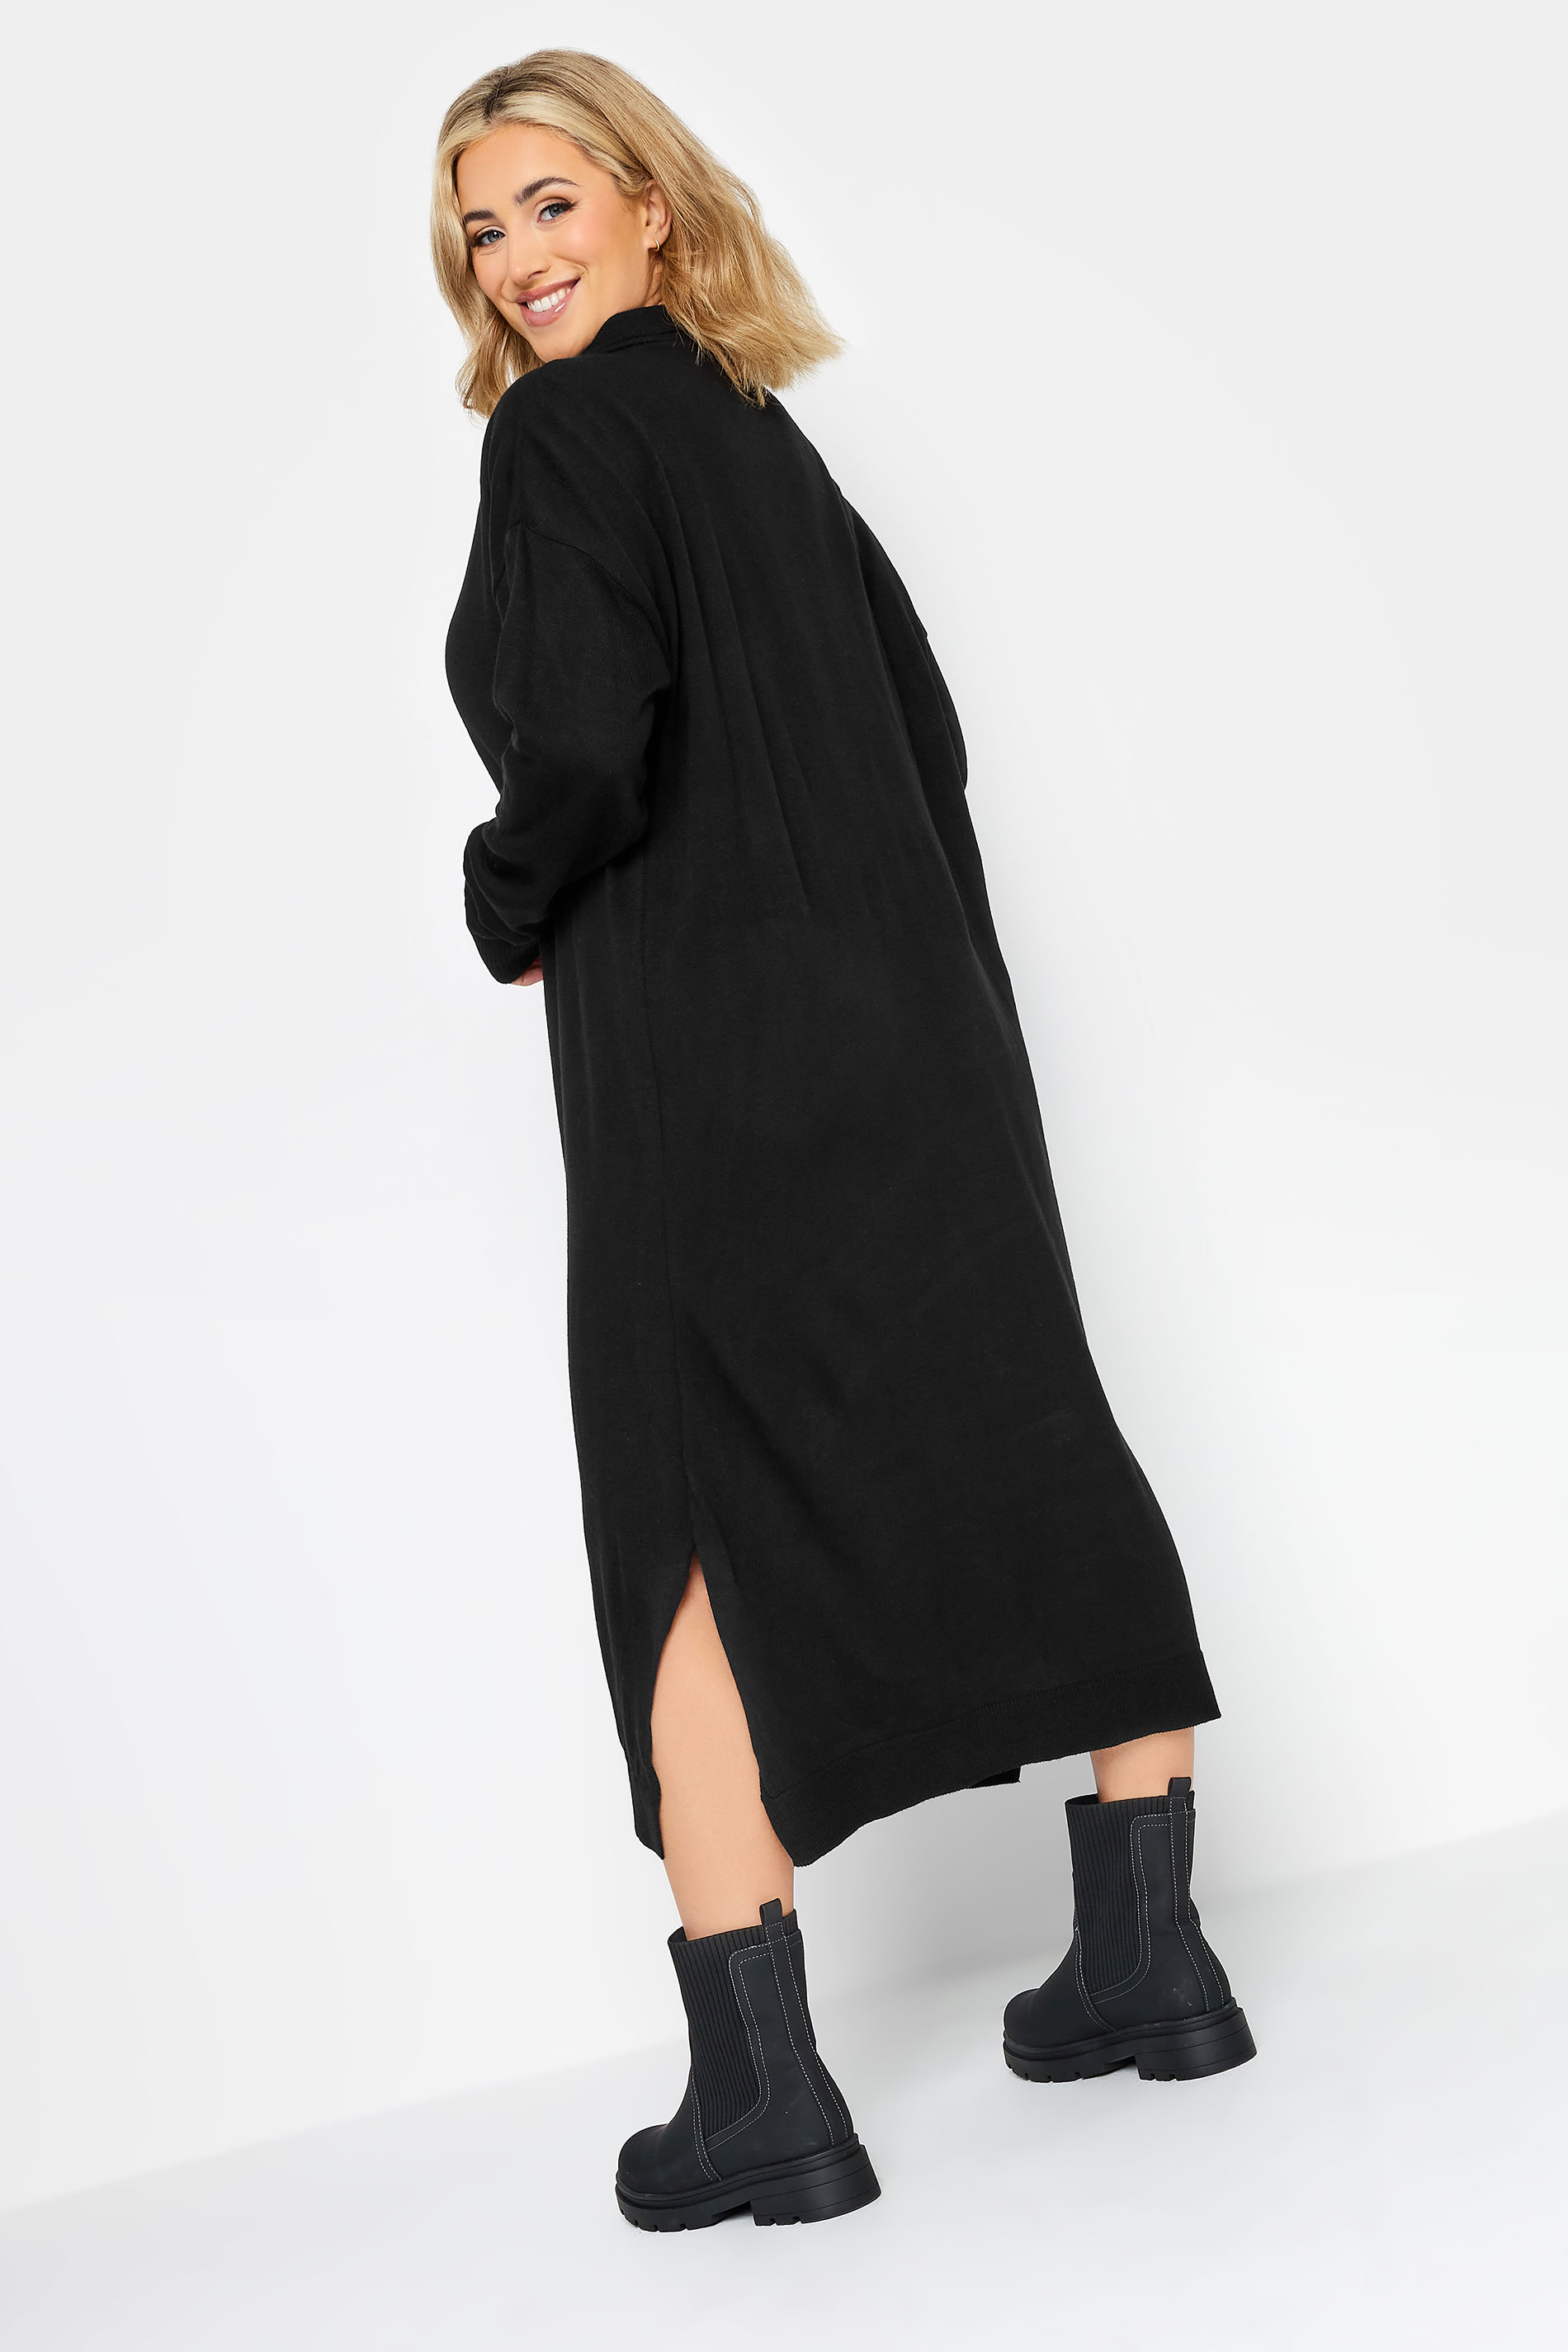 Plus Size Black Open Collar Knitted Jumper Dress | Yours Clothing 3